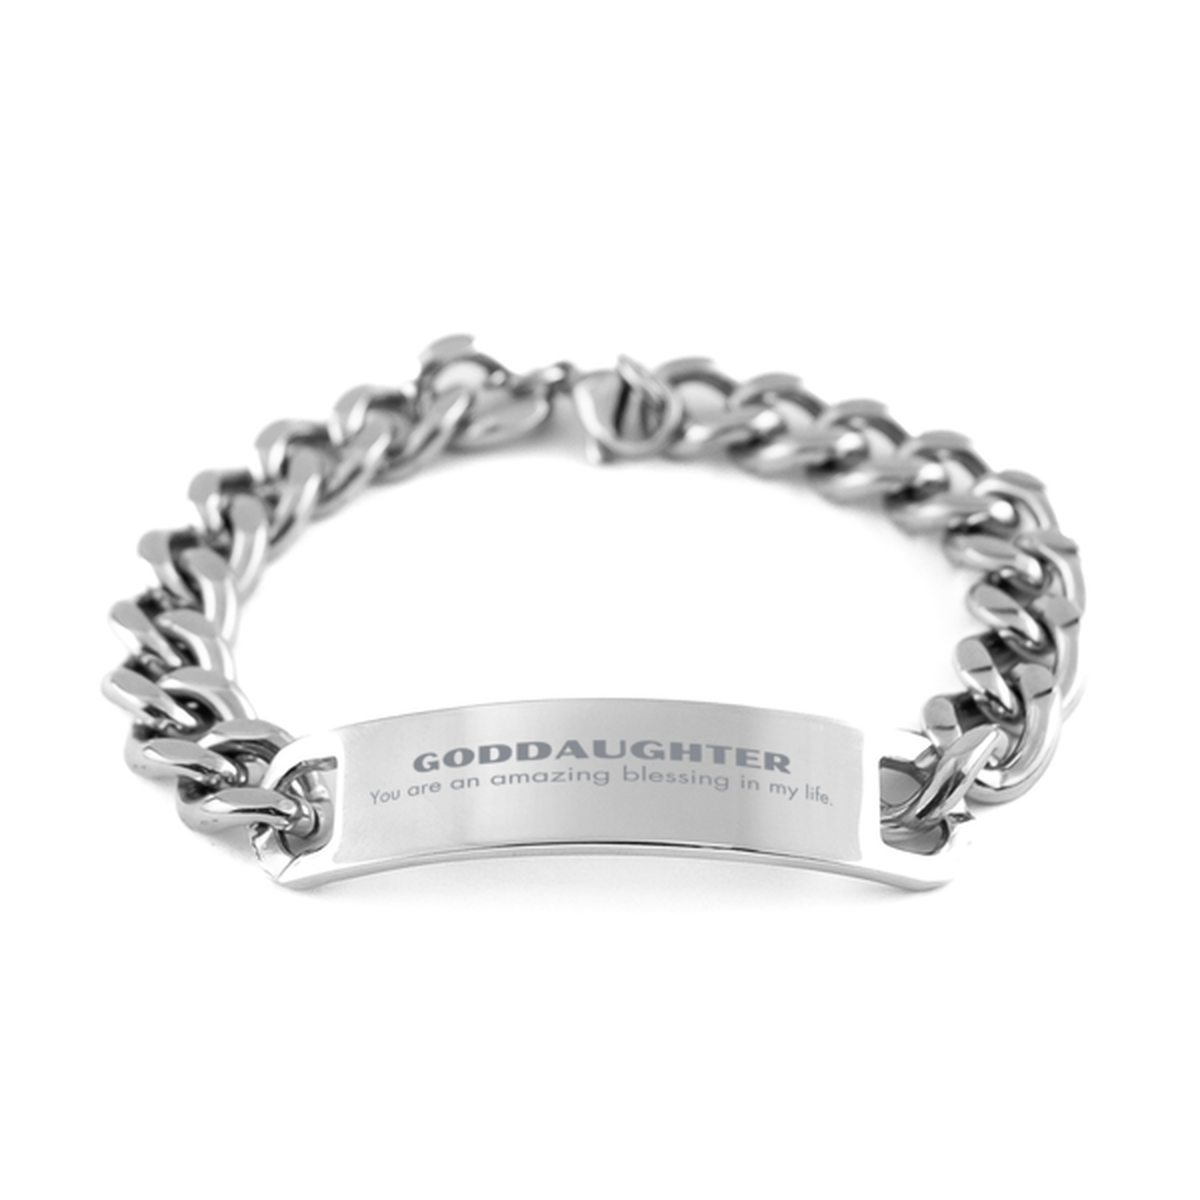 Goddaughter Cuban Chain Stainless Steel Bracelet, You are an amazing blessing in my life, Thank You Gifts For Goddaughter, Inspirational Birthday Christmas Unique Gifts For Goddaughter